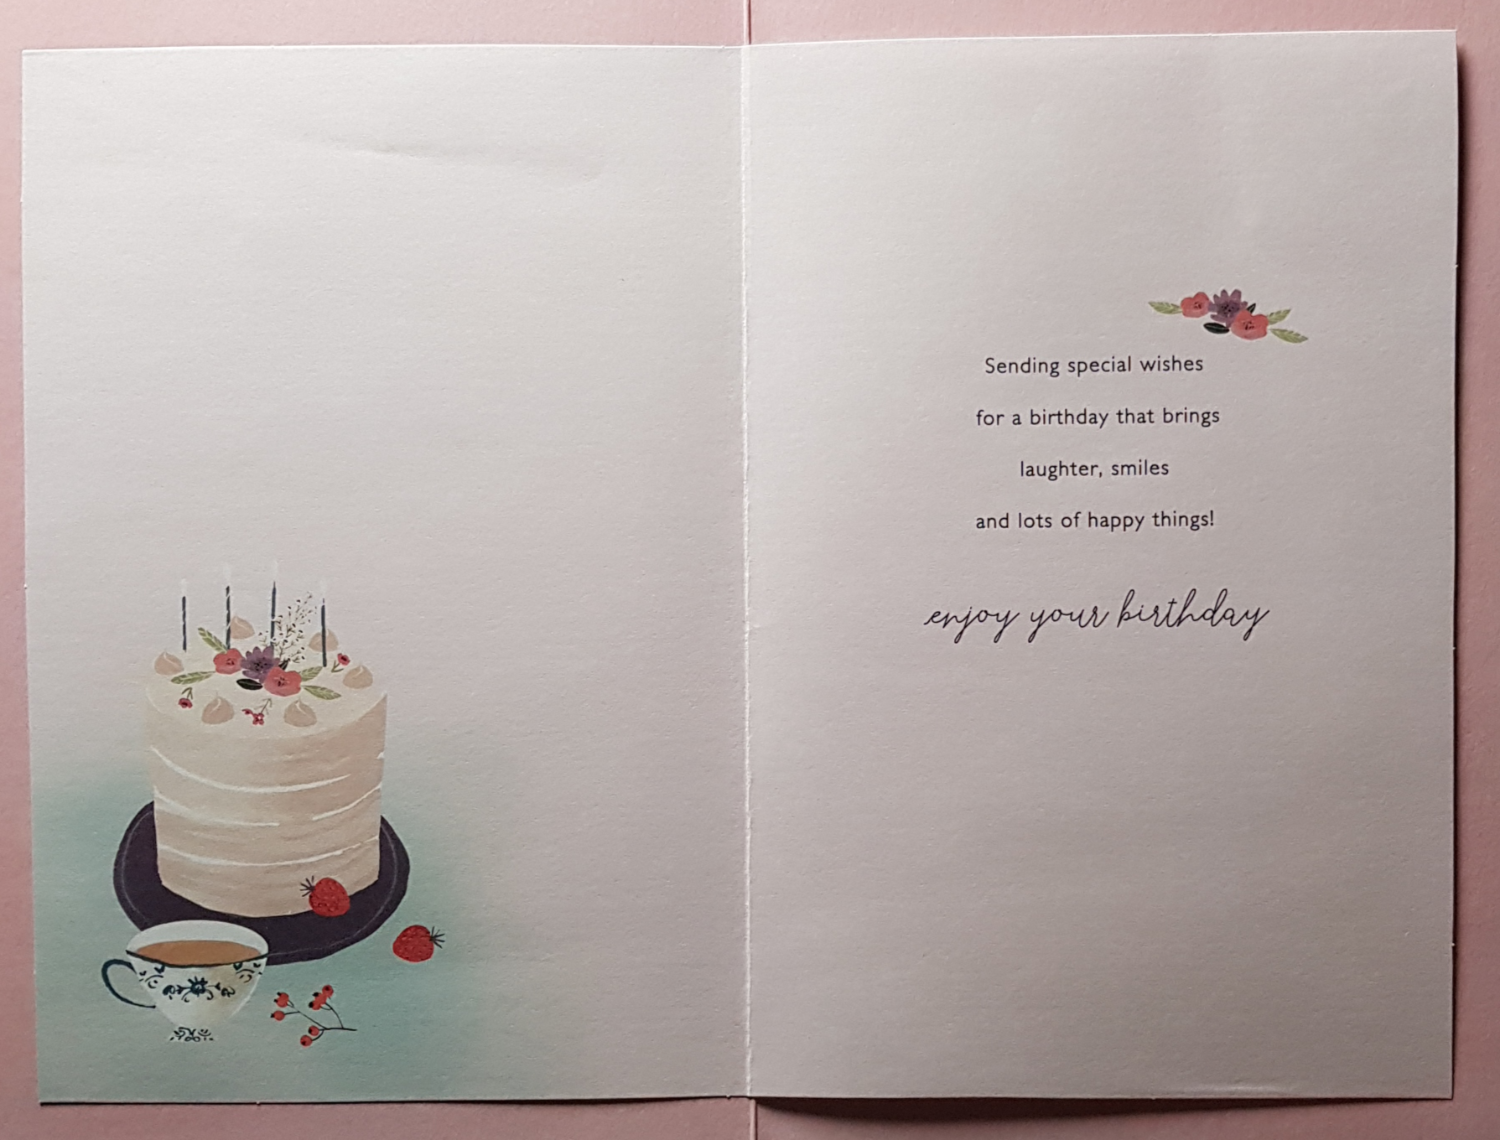 Birthday Card - General Female / A Beautiful Cake With Flowers And Four Candles